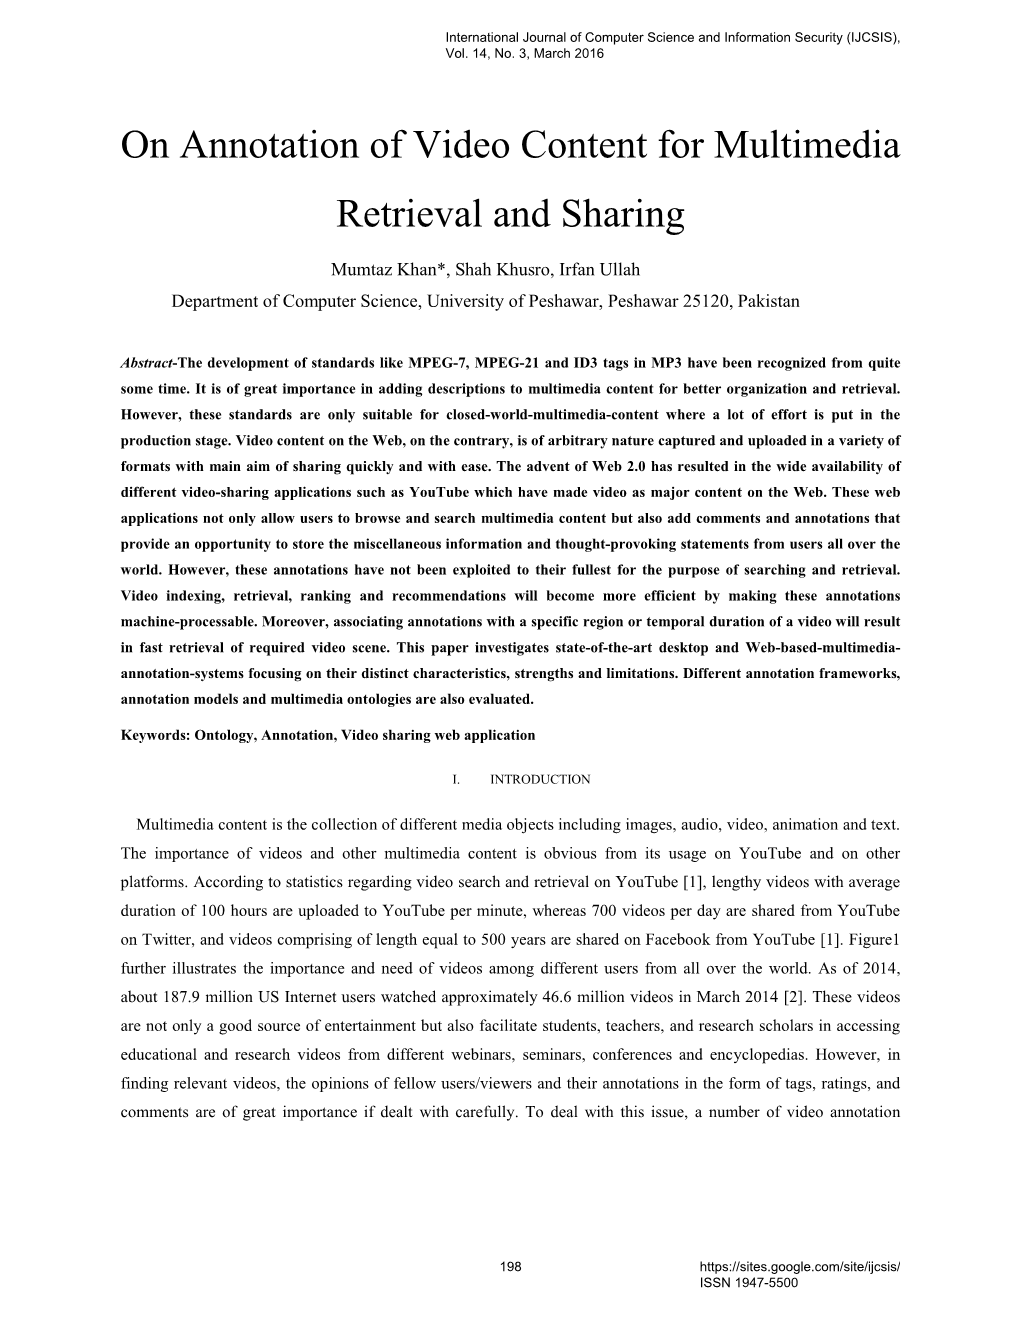 On Annotation of Video Content for Multimedia Retrieval and Sharing